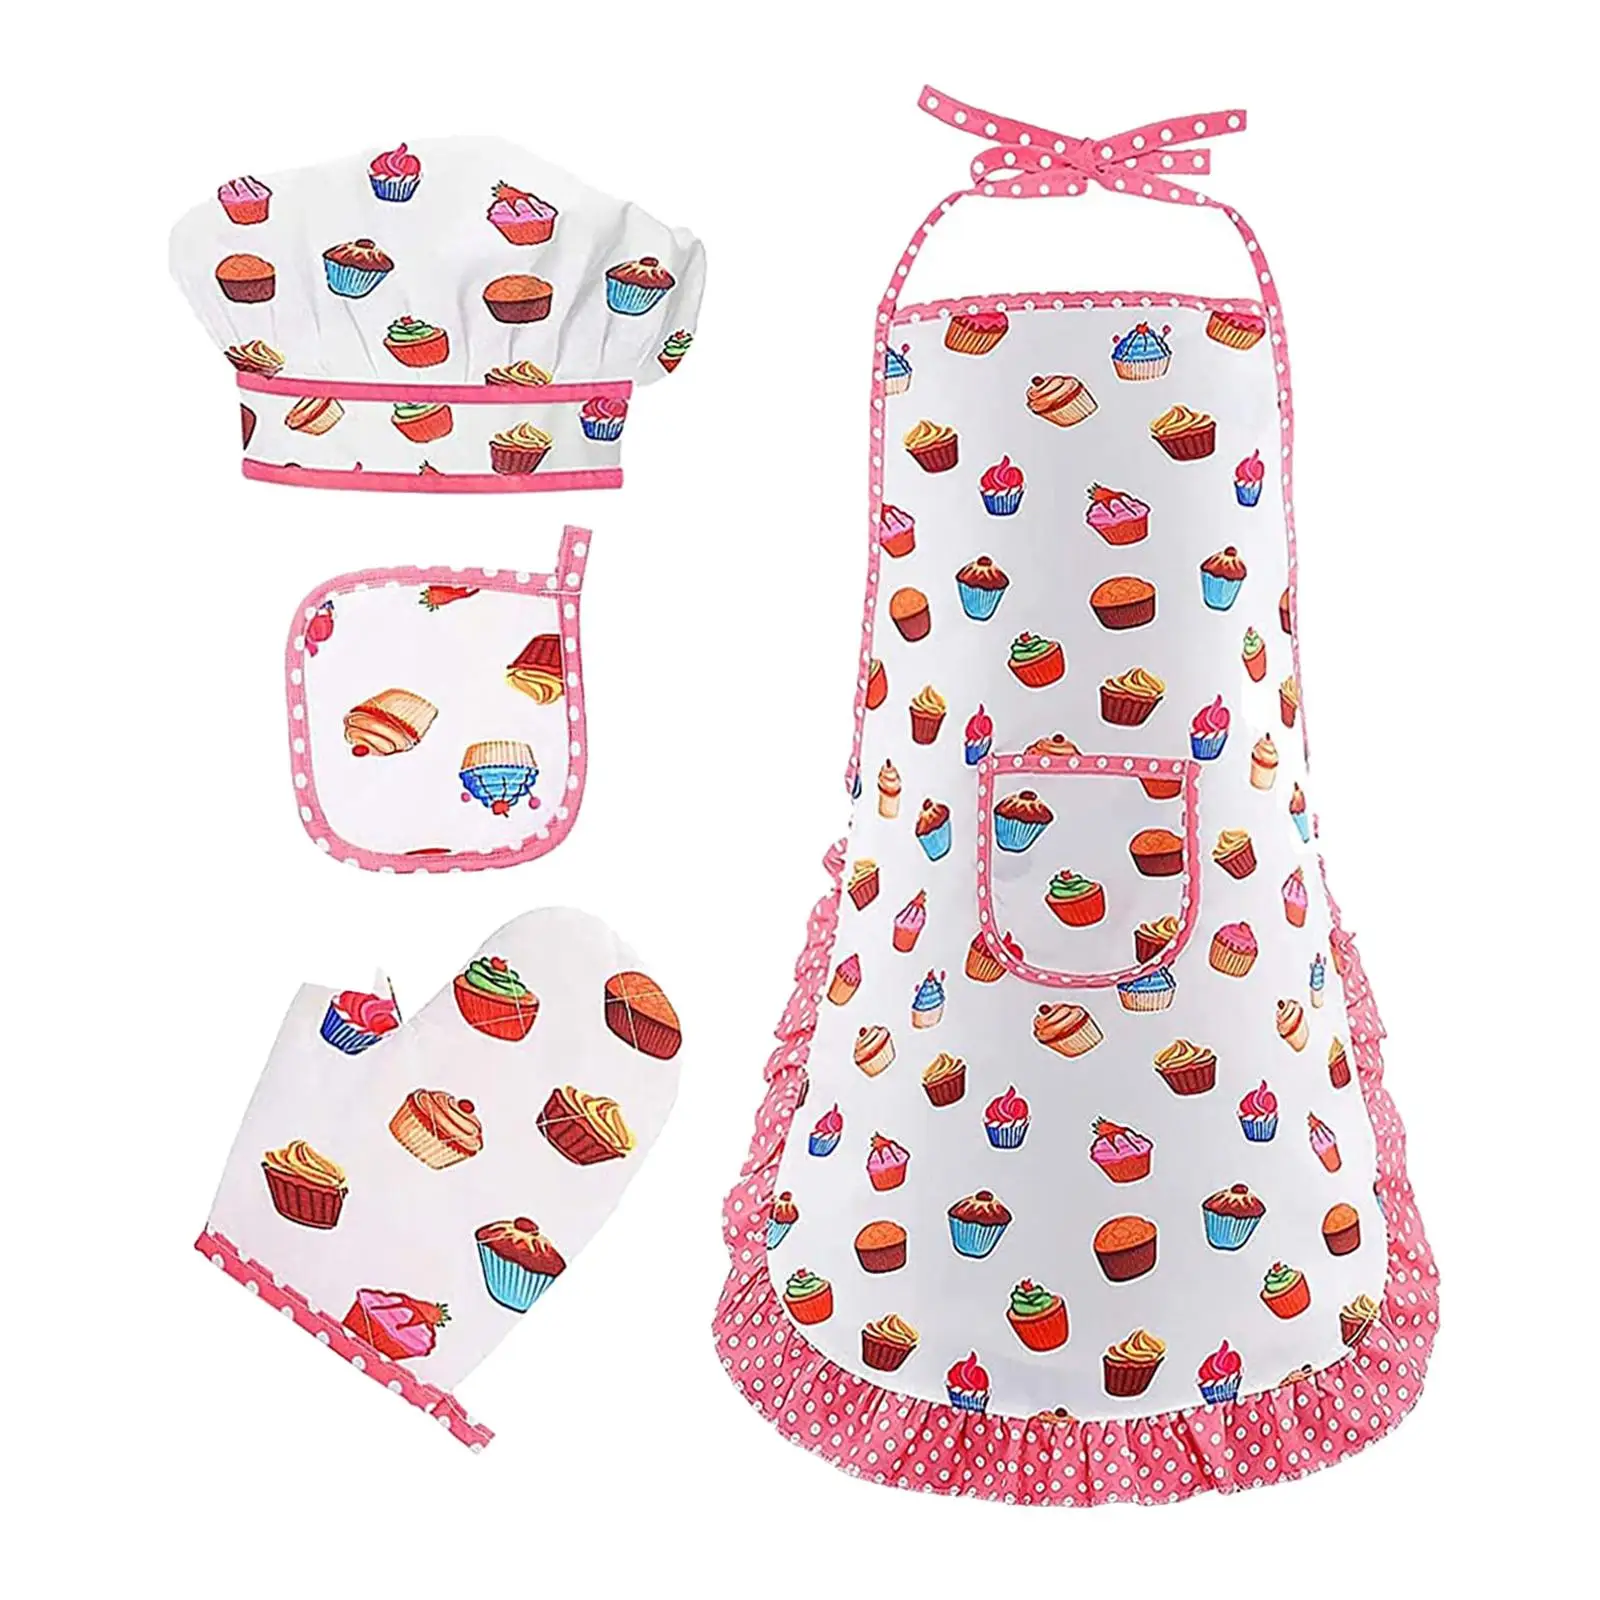 Simulation Kids Cooking Baking Set Early Learning Educational Chef Hat Chef Clothing Set for Girls Toddlers Children